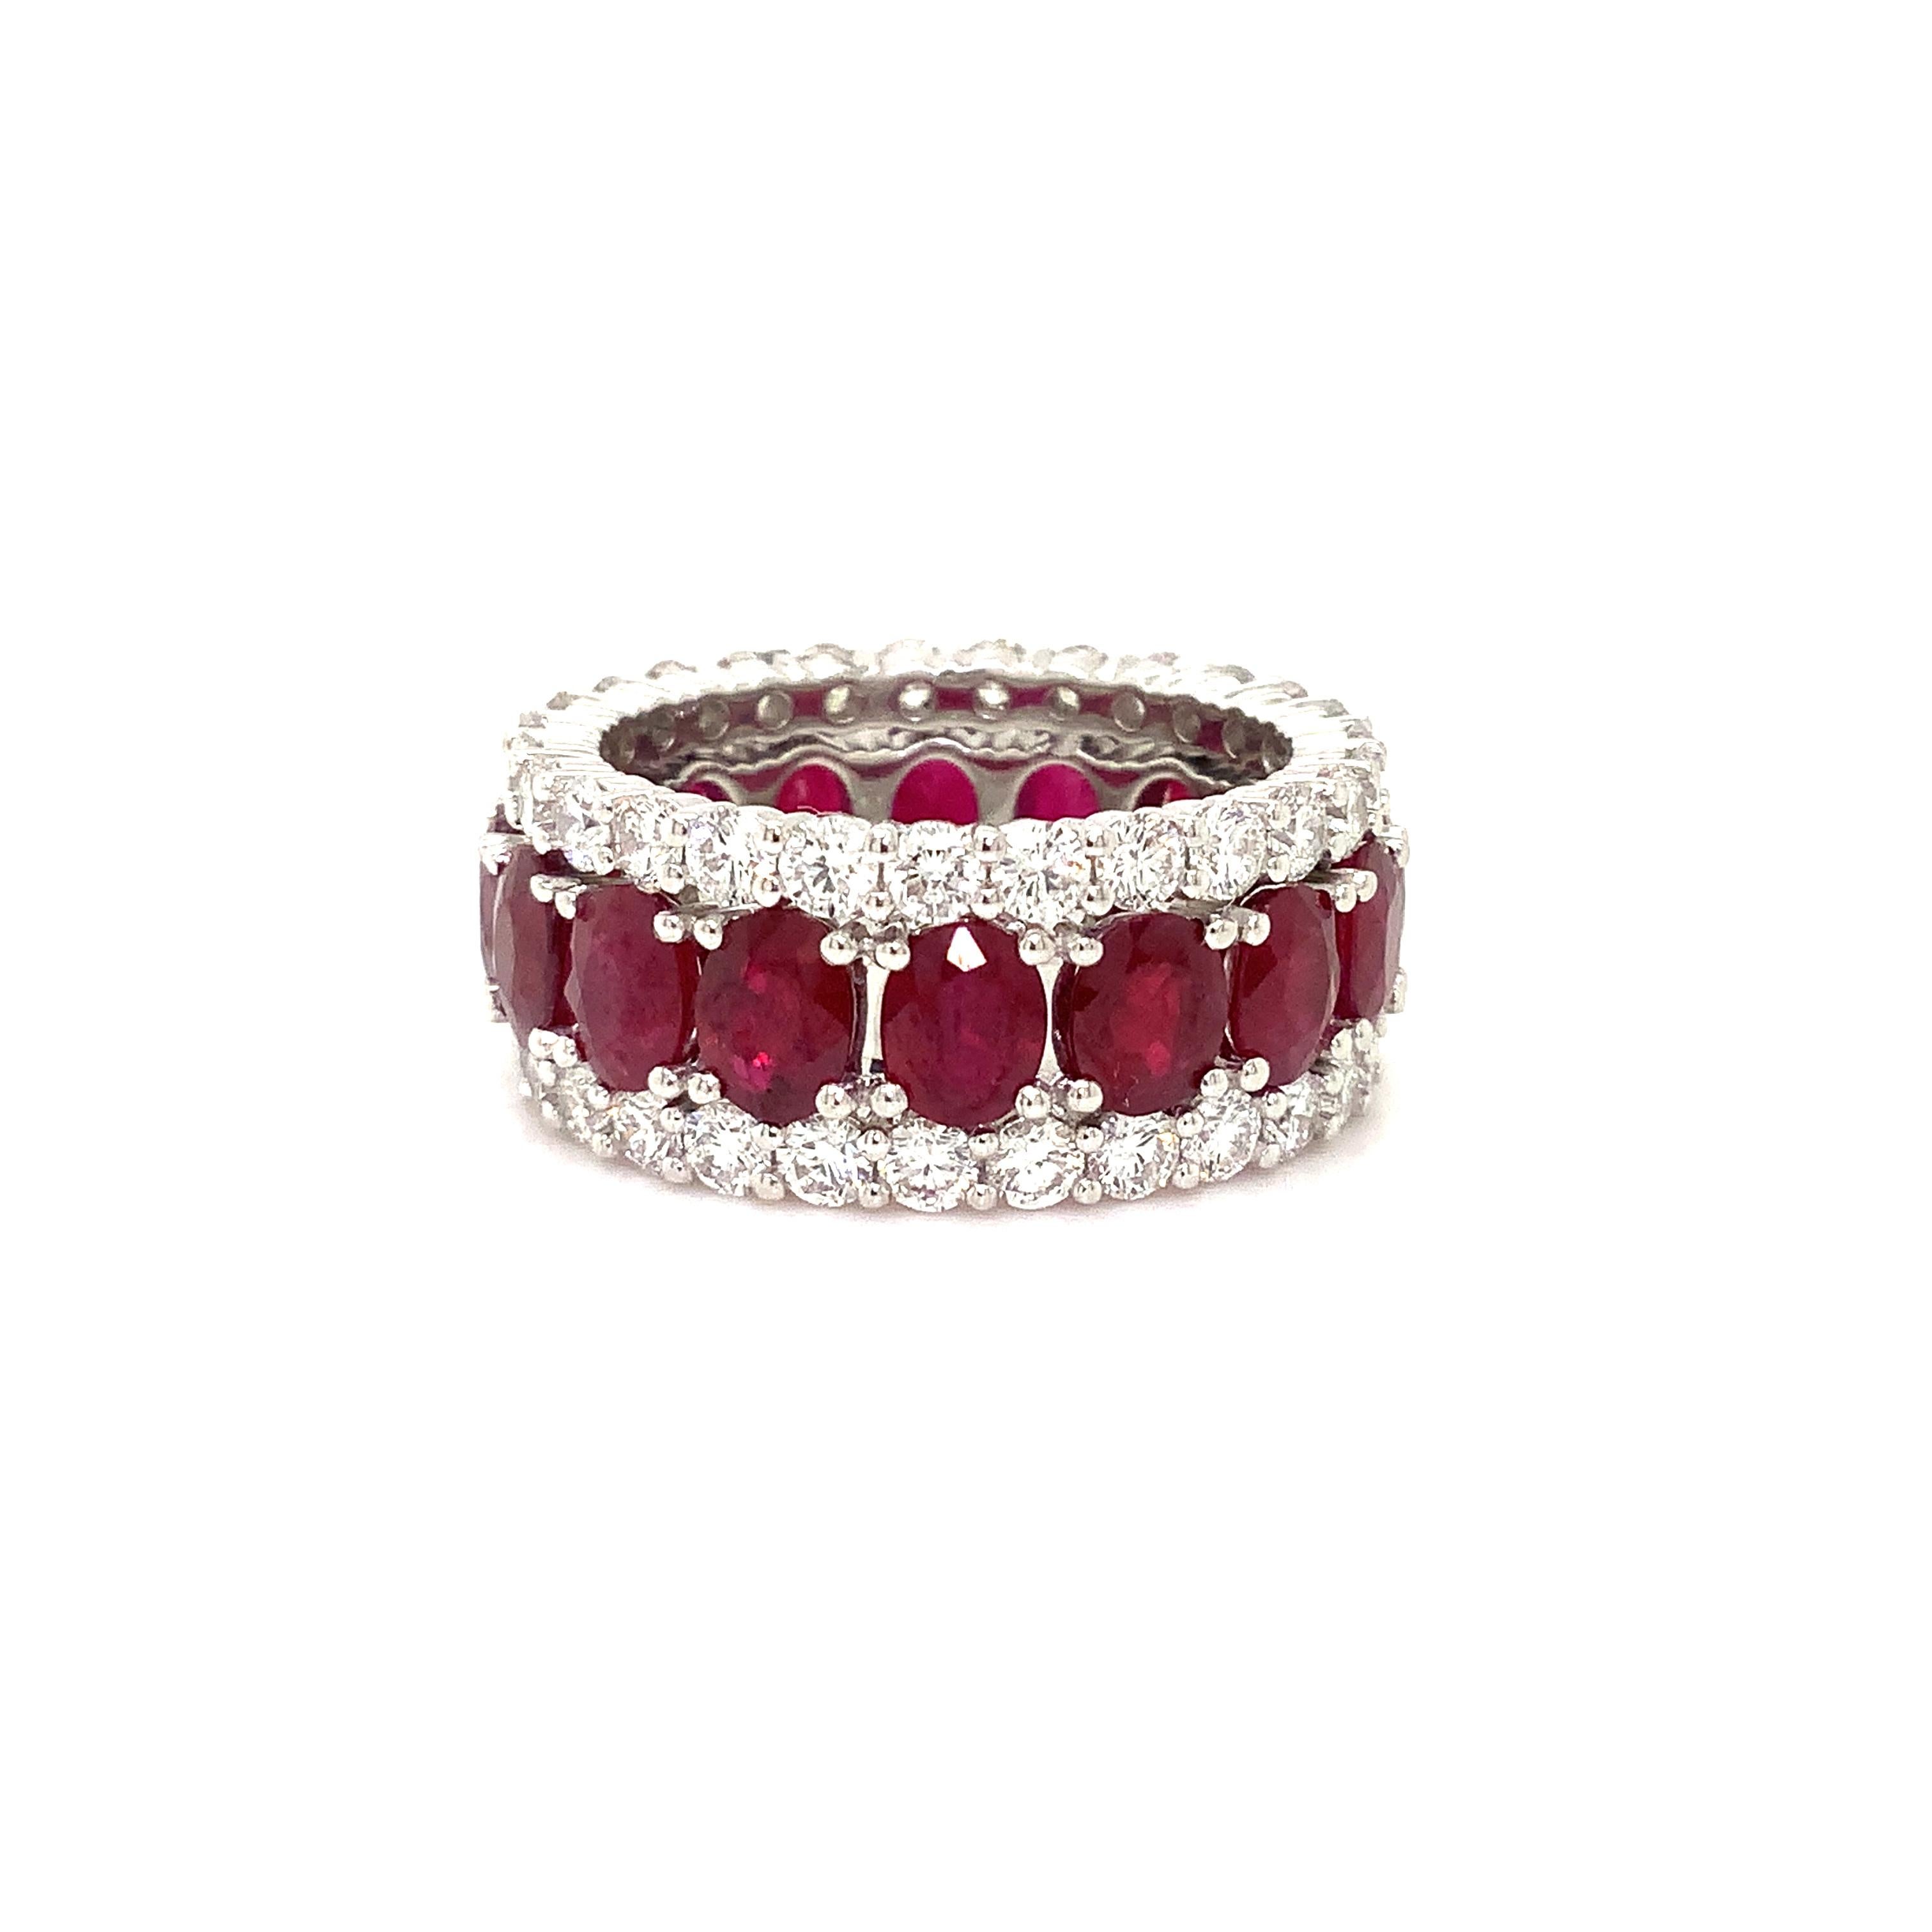 This extraordinary eternity ring features round-cut diamonds (2.36 TCW) arranged at its edges, complemented by 16 vertically set oval rubies (7.08 cts. tw.), of Dark Medium Red Intense Burmese Color and Very Good Clarity Make and Polish. The